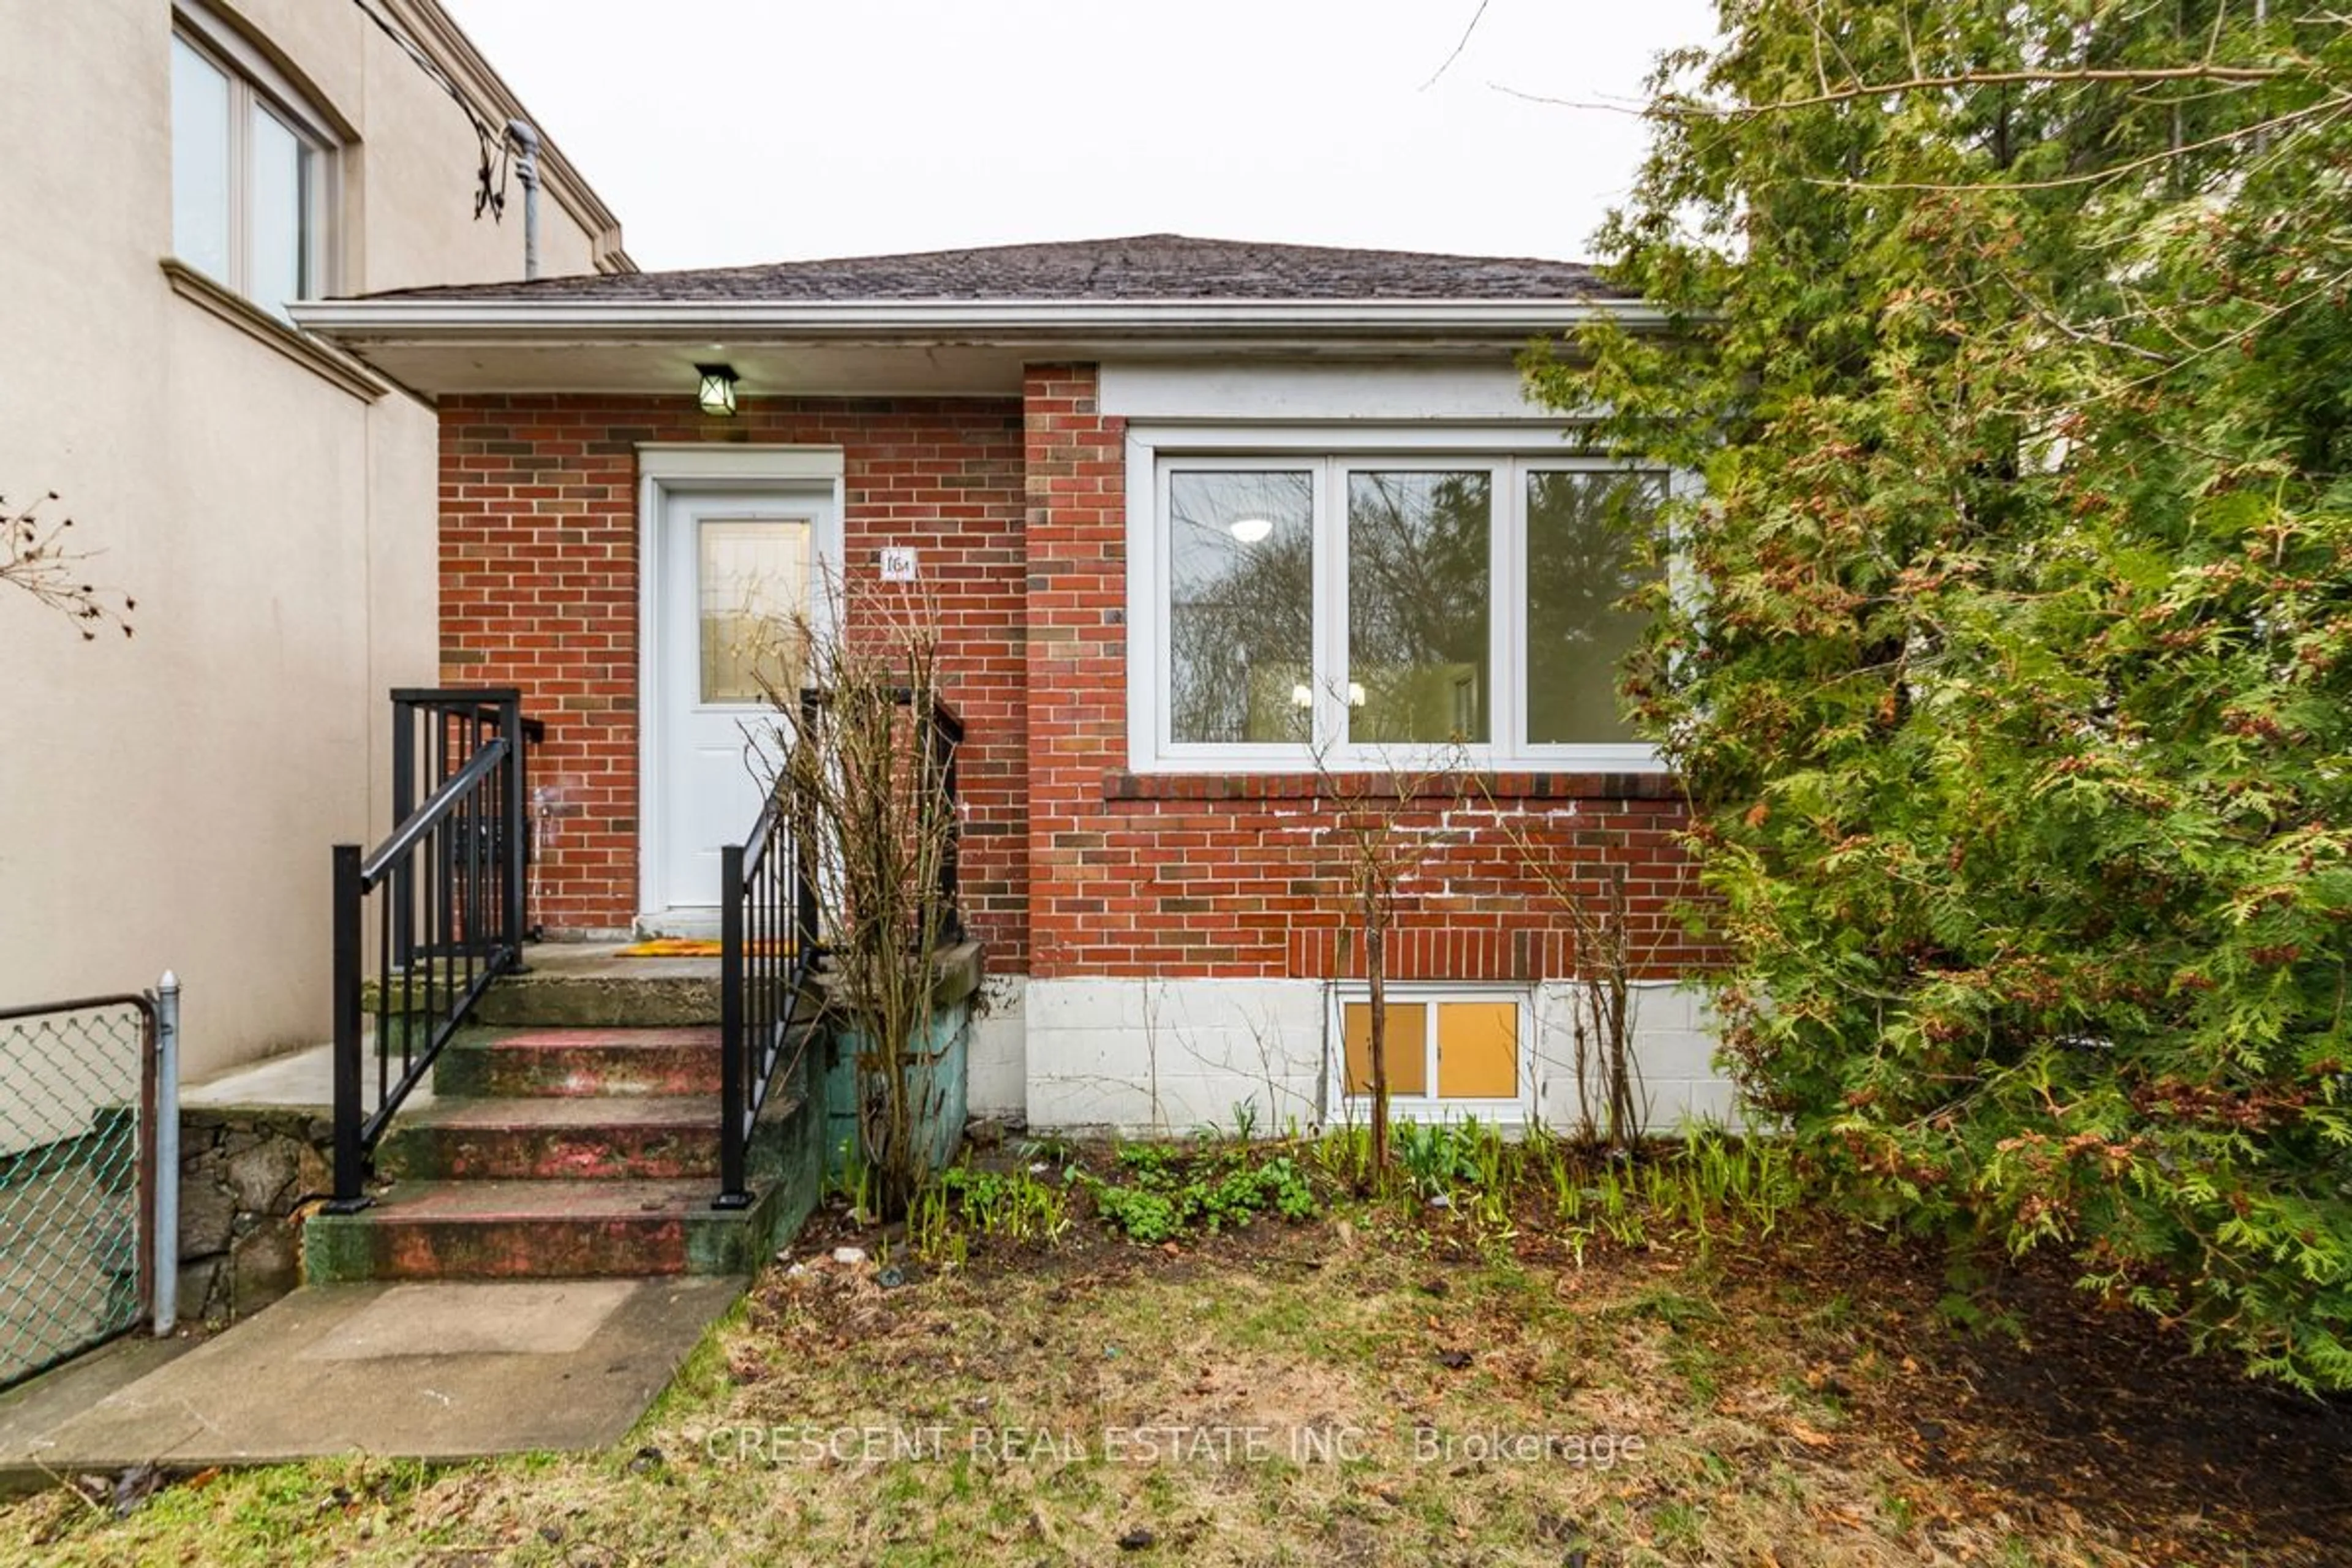 Home with brick exterior material for 16A Scarlett Rd, Toronto Ontario M6N 4K1